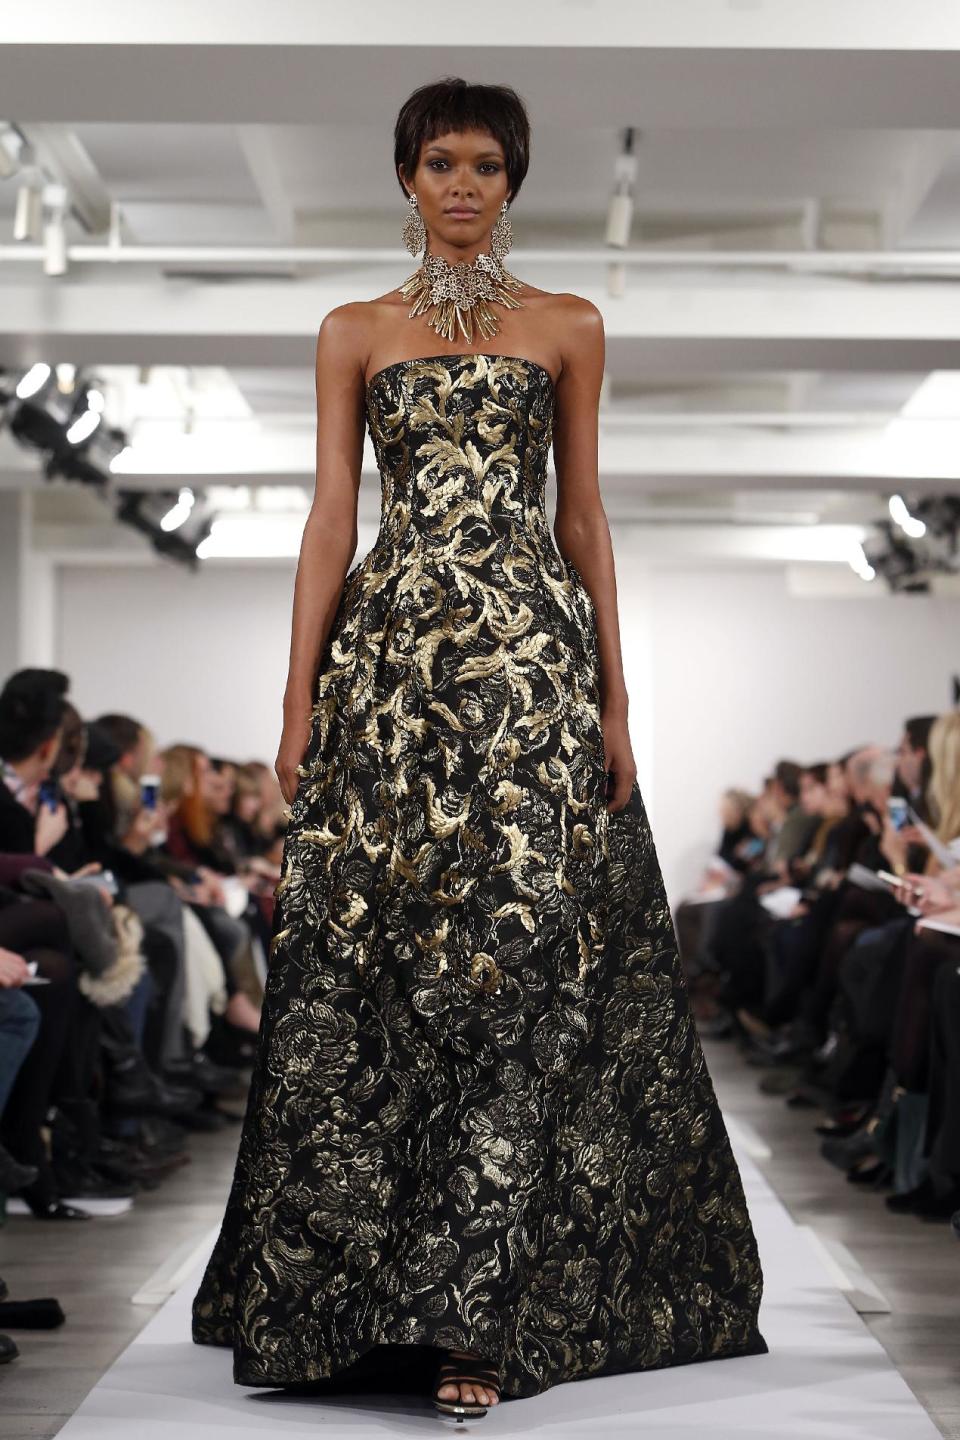 The Oscar de la Renta Fall 2014 collection is modeled during Fashion Week in New York, Tuesday, Feb. 11, 2014. (AP Photo/Jason DeCrow)